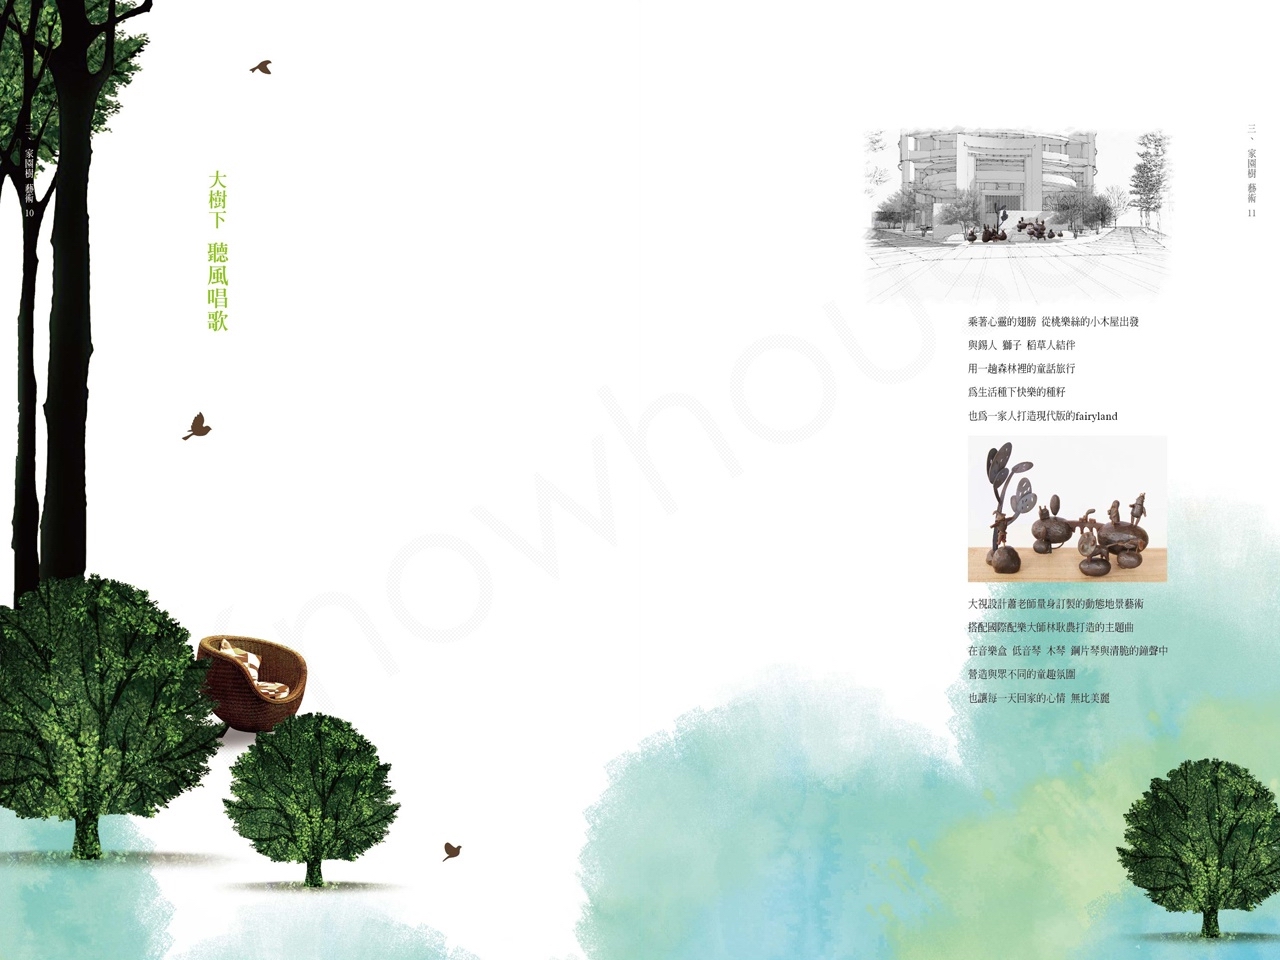 a brochure has been created to feature images and trees